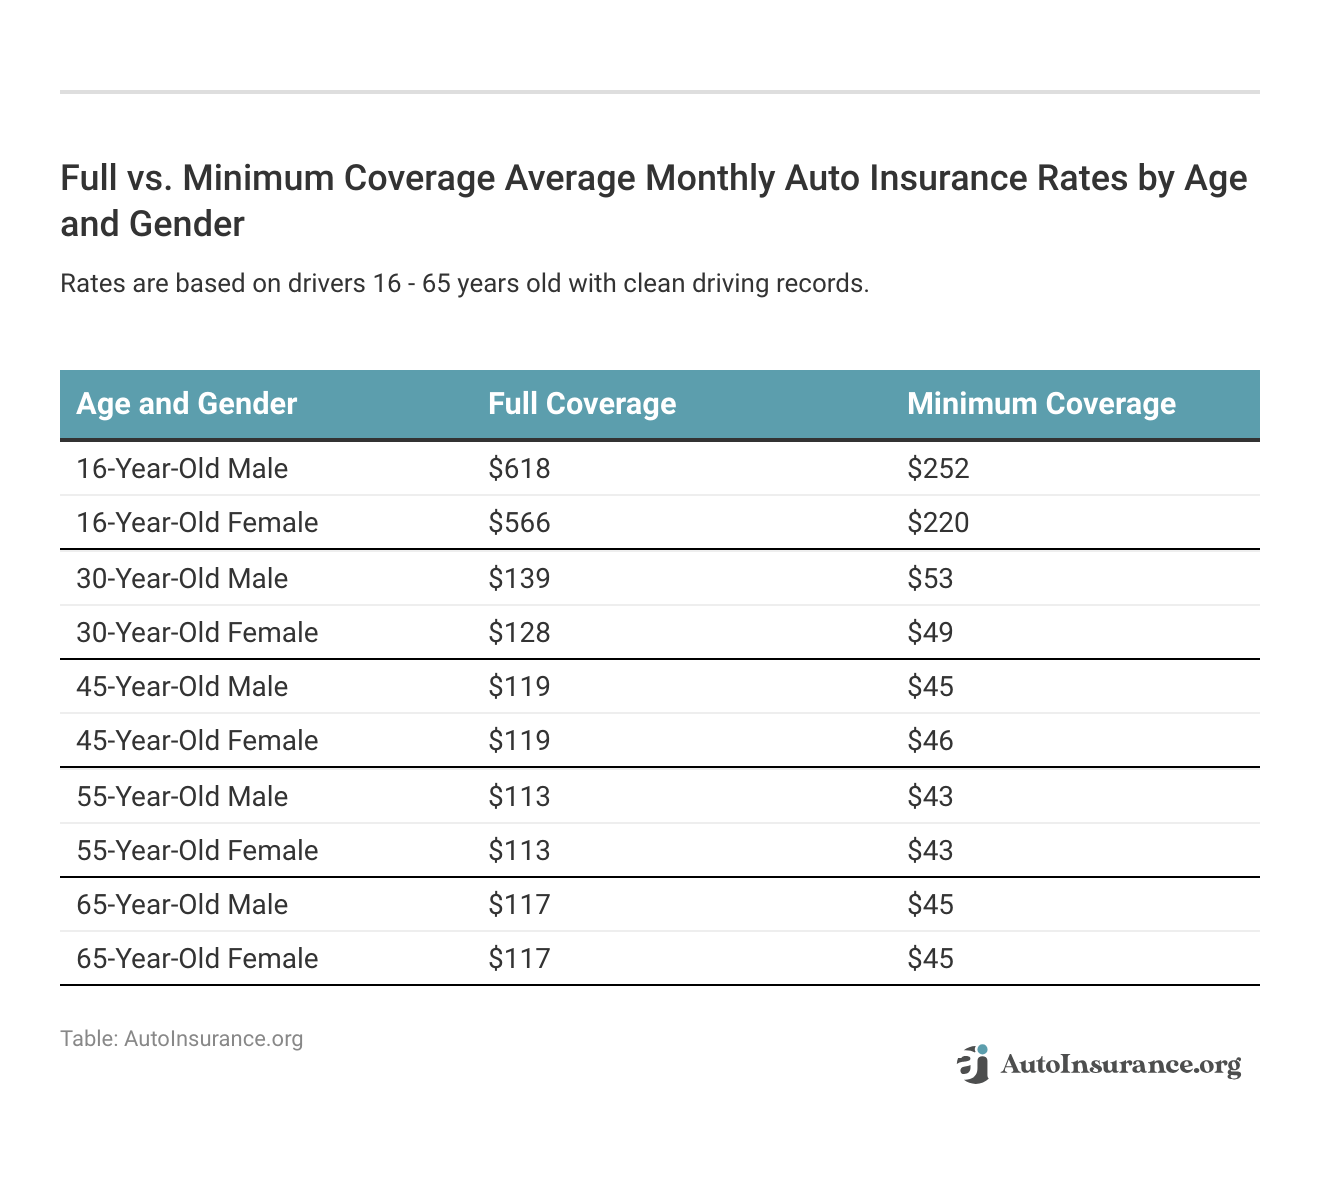 <h3>Full vs. Minimum Coverage Average Monthly Auto Insurance Rates by Age and Gender</h3>